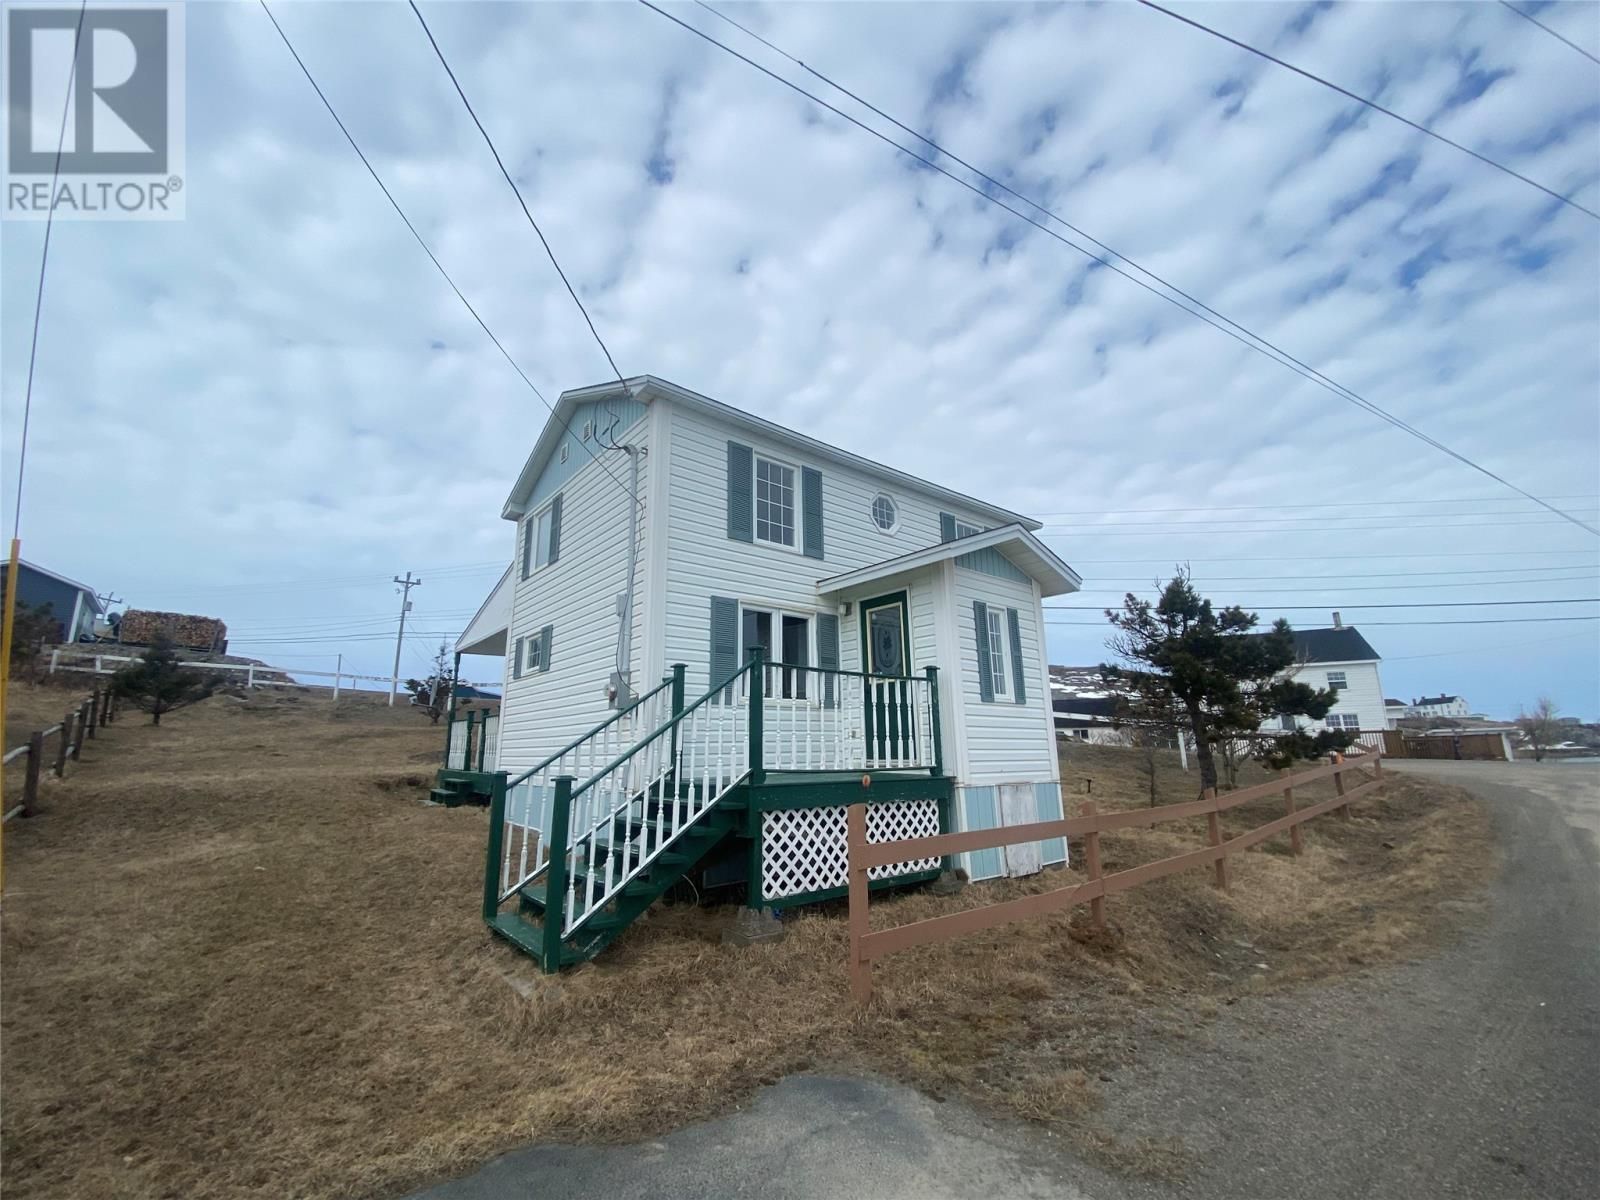 Main Photo: 2 Millers Road in Fogo: House for sale : MLS®# 1257850